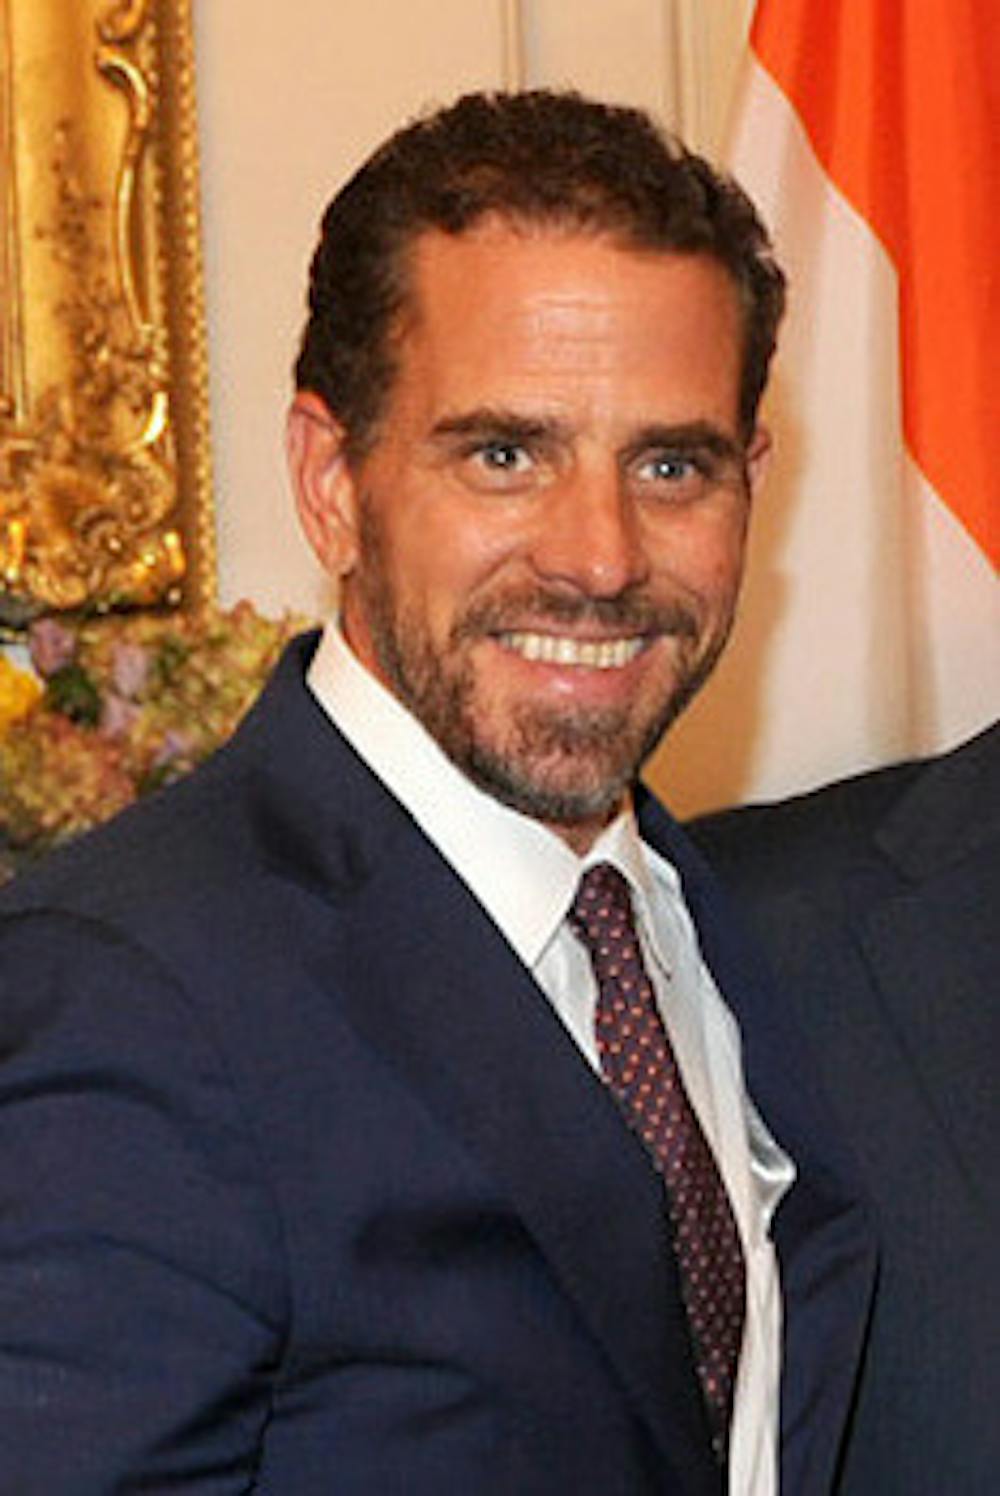 <p><em>In the past week, the son of President Joe Biden, Hunter Biden, was indicted for a firearms purchase that took place in 2018 (Photo courtesy of Wikimedia Commons/“</em><a href="https://commons.wikimedia.org/wiki/File:Hunter_Biden_September_30,_2014.jpg" target=""><em>Hunter Biden September 30, 2014</em></a><em>” by Prime Minister’s Office. September 30, 2014).</em></p><p><em><br/></em></p>